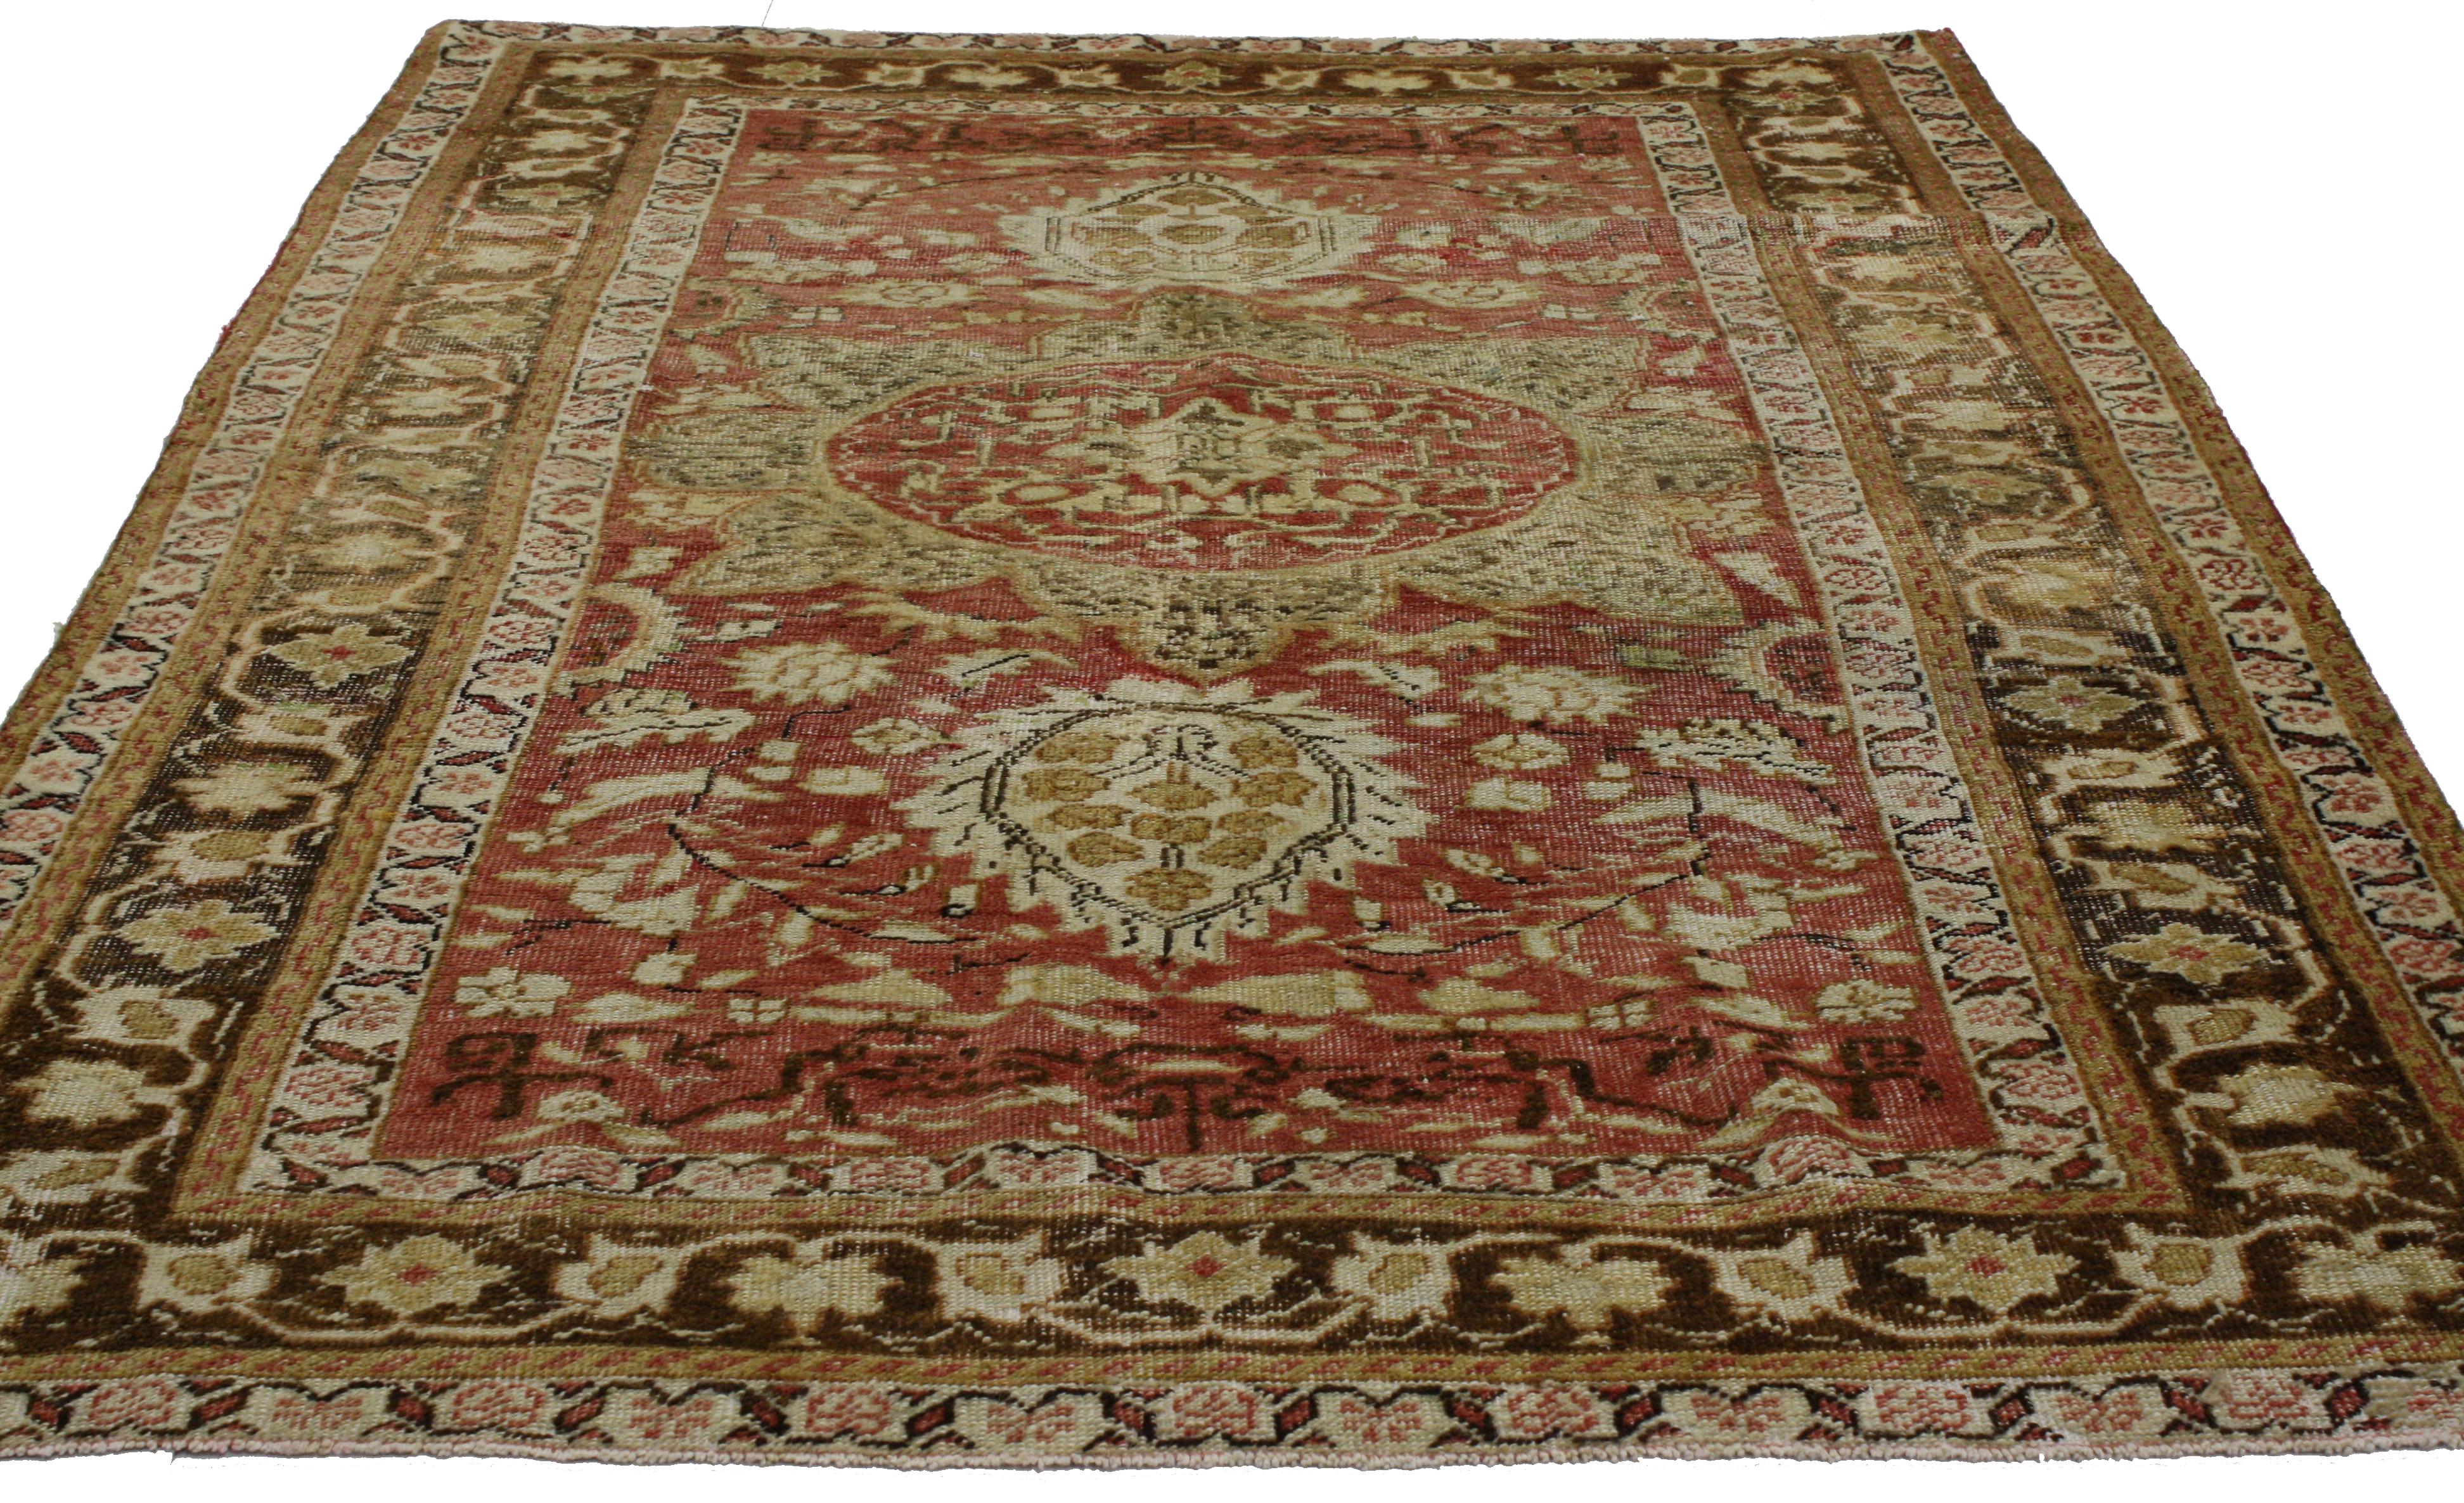 51560, distressed vintage Turkish Oushak rug with artisan style, entry or foyer rug. This hand knotted wool distressed vintage Turkish Oushak rug embodies a rustic Artisan style. Immersed in Anatolian history and refined colors, this vintage Oushak